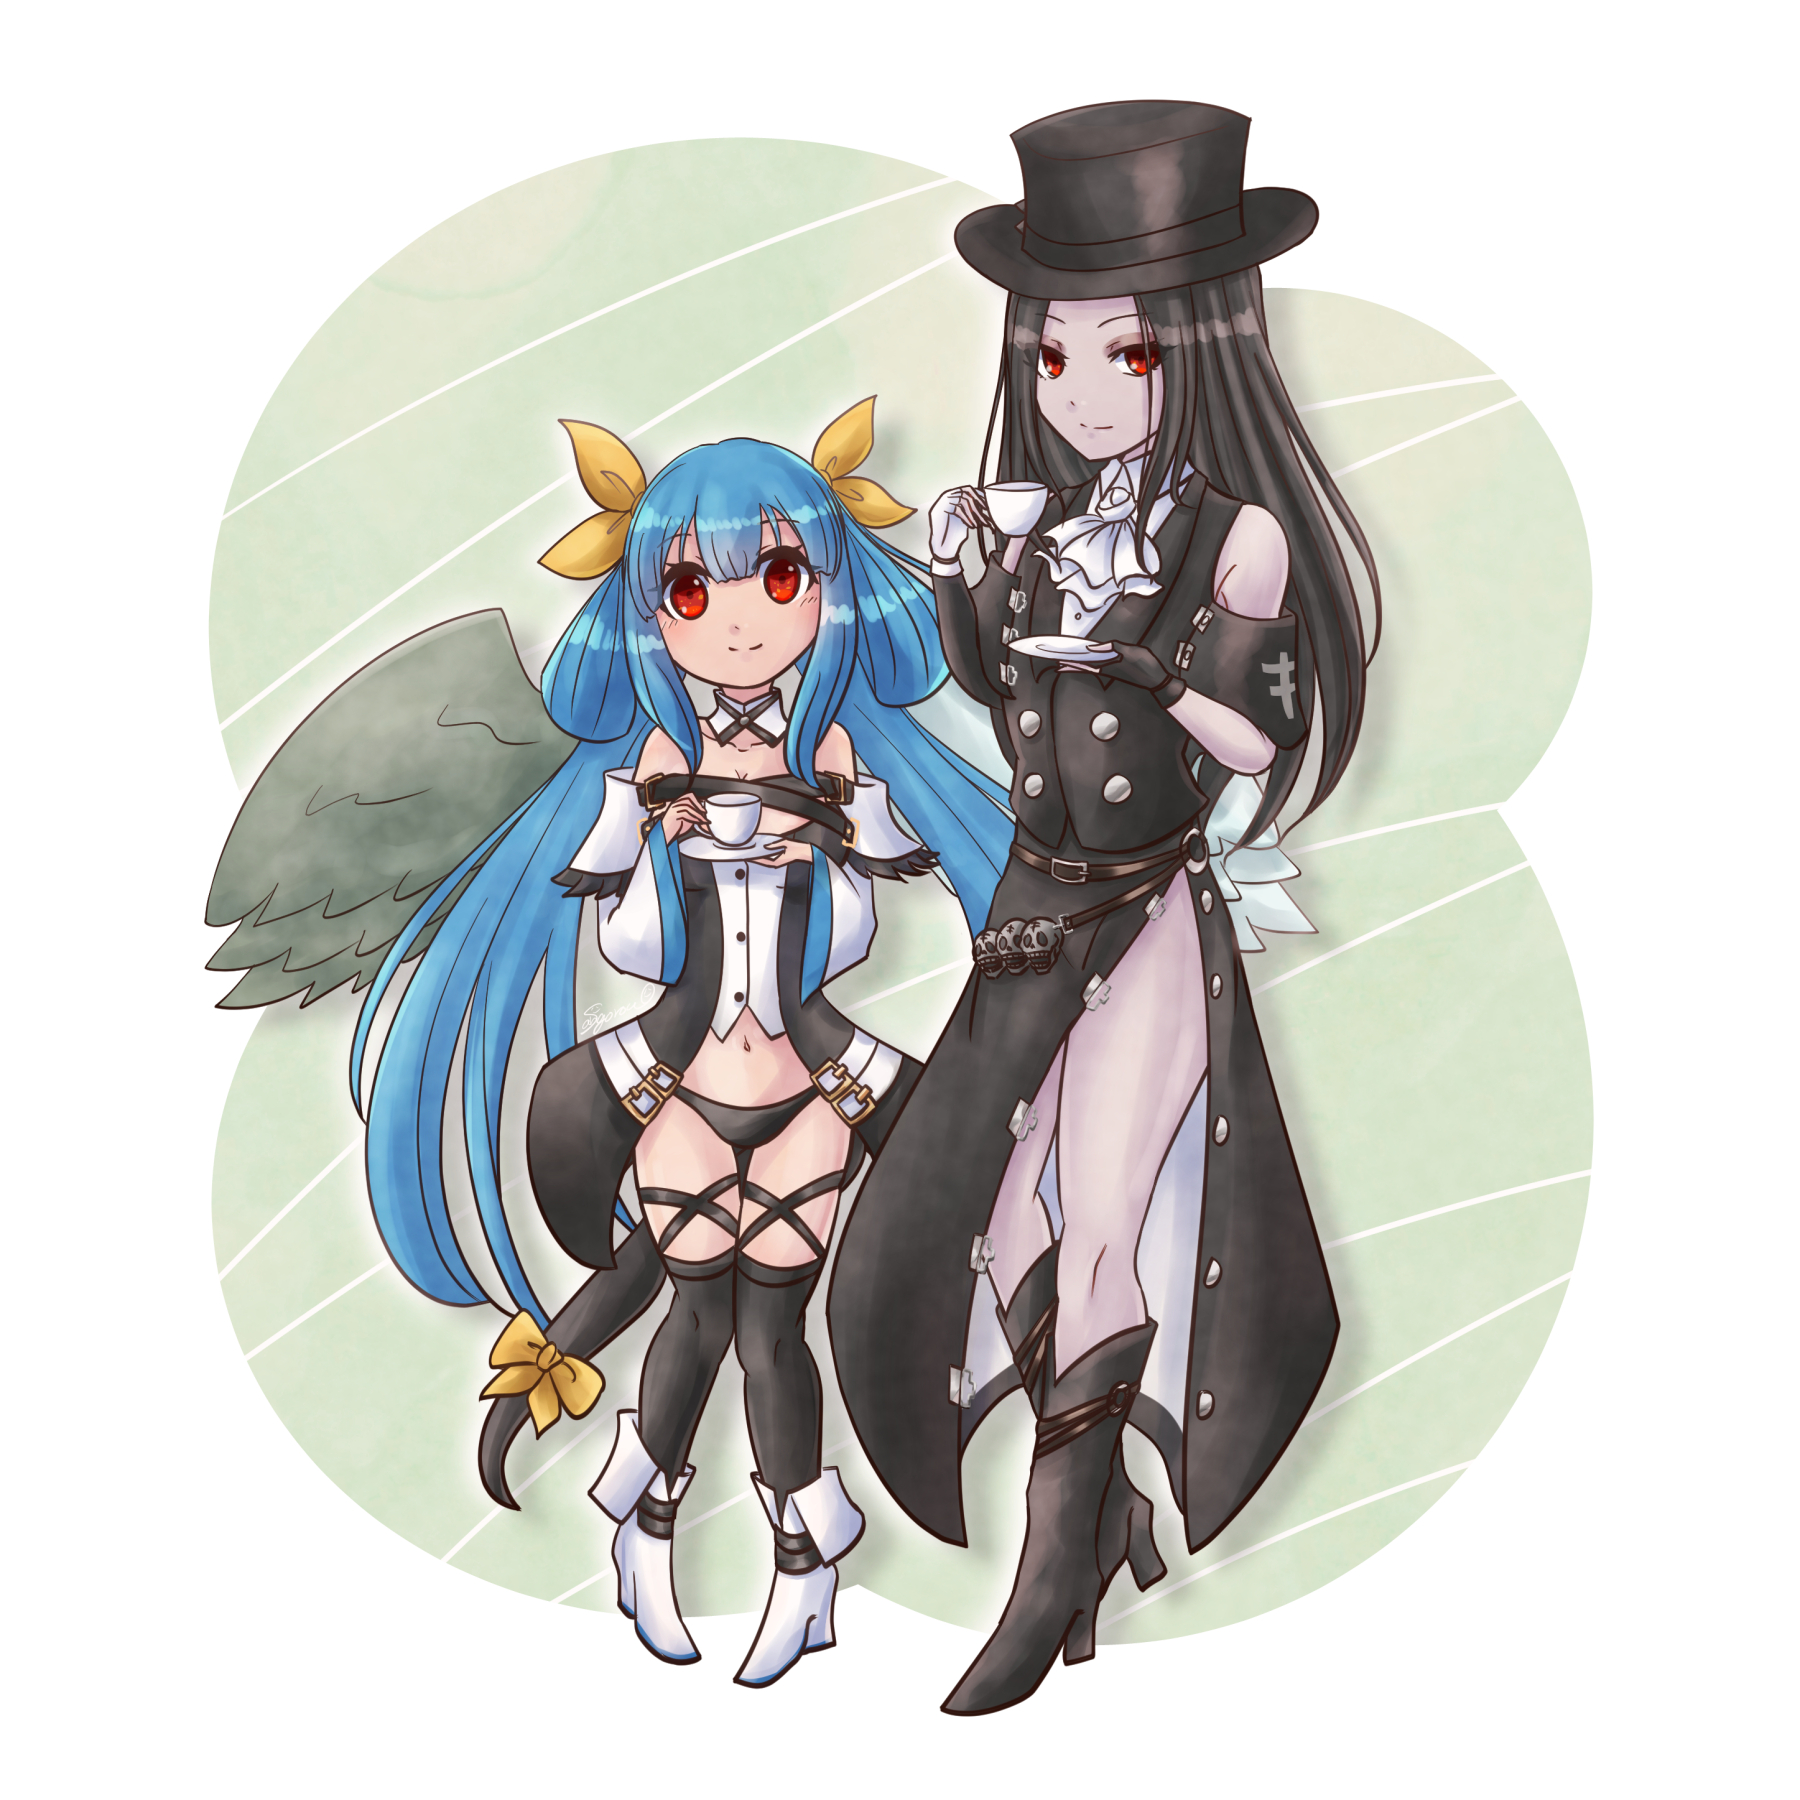 Guilty Gear Dizzy Guilty Gear Testament Guilty Gear Anime Couple Anime Girl With Wings Anime Girls A 1800x1800